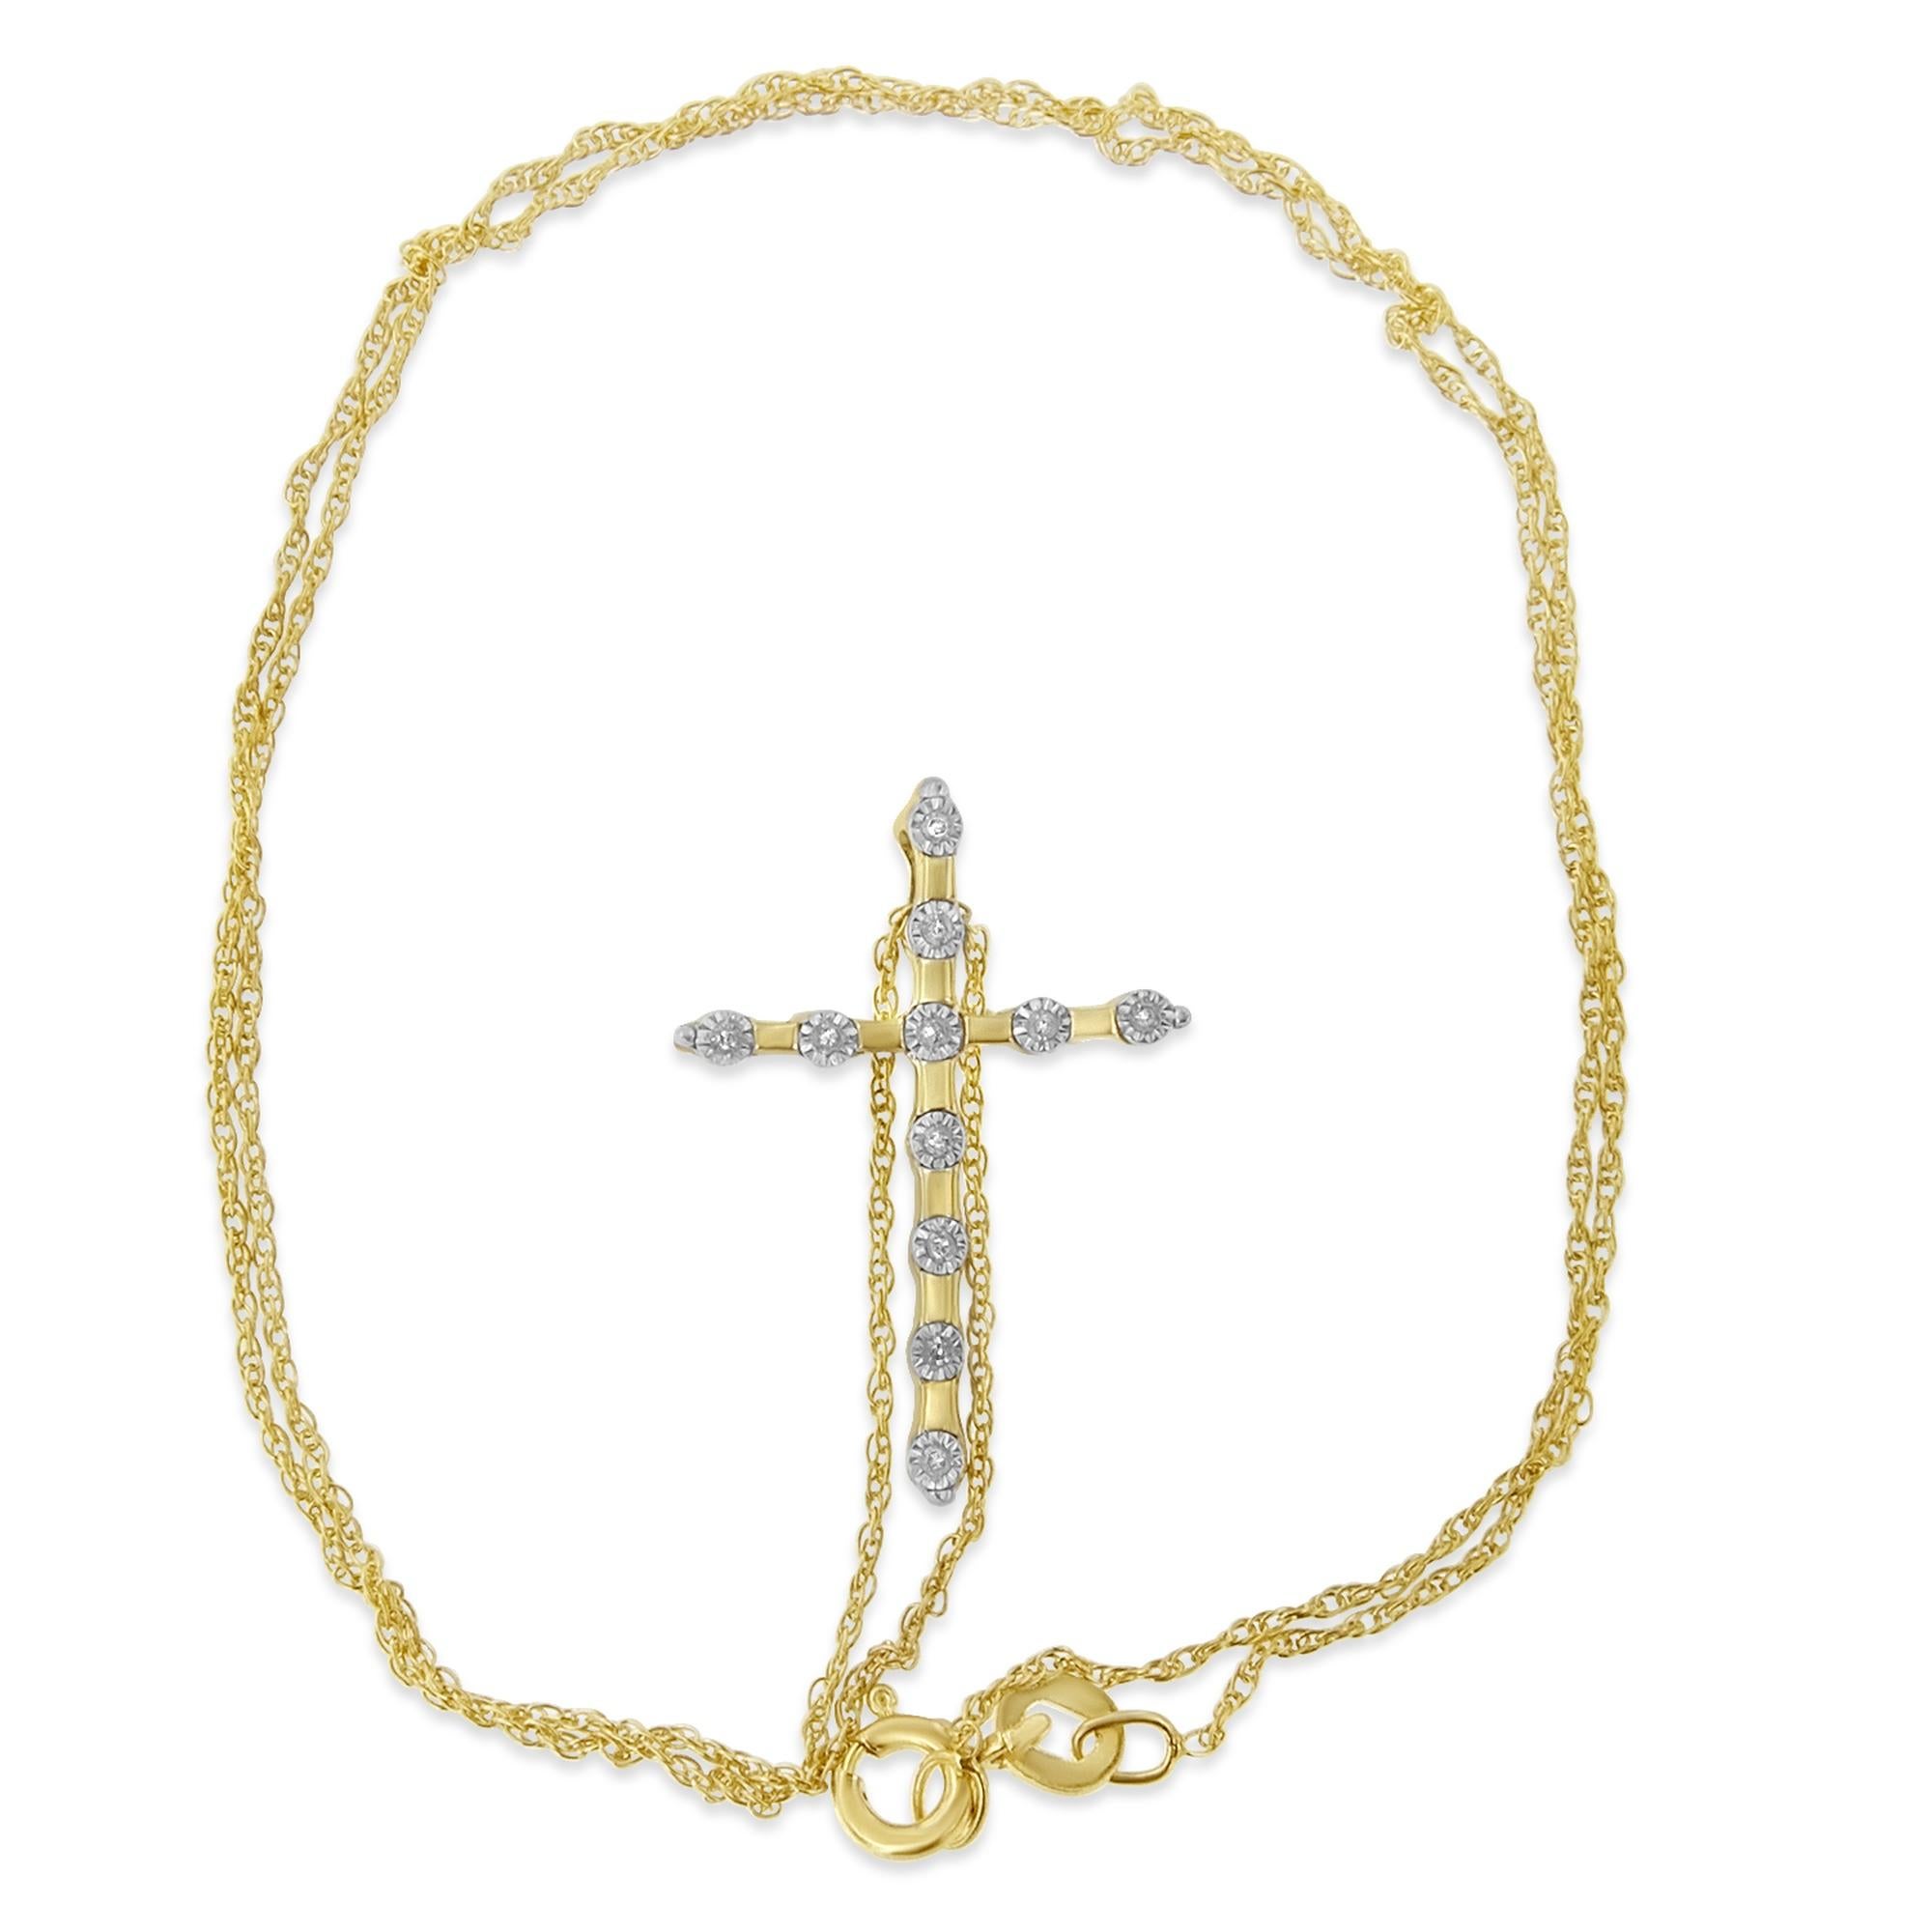 Embrace your inner faith with this beautifully created 10k yellow gold plated silver cross pendant. The silver is genuine .925 sterling silver for a lifetime of tarnish-free wear. The cross motif is embellished with evenly spaced out round-cut